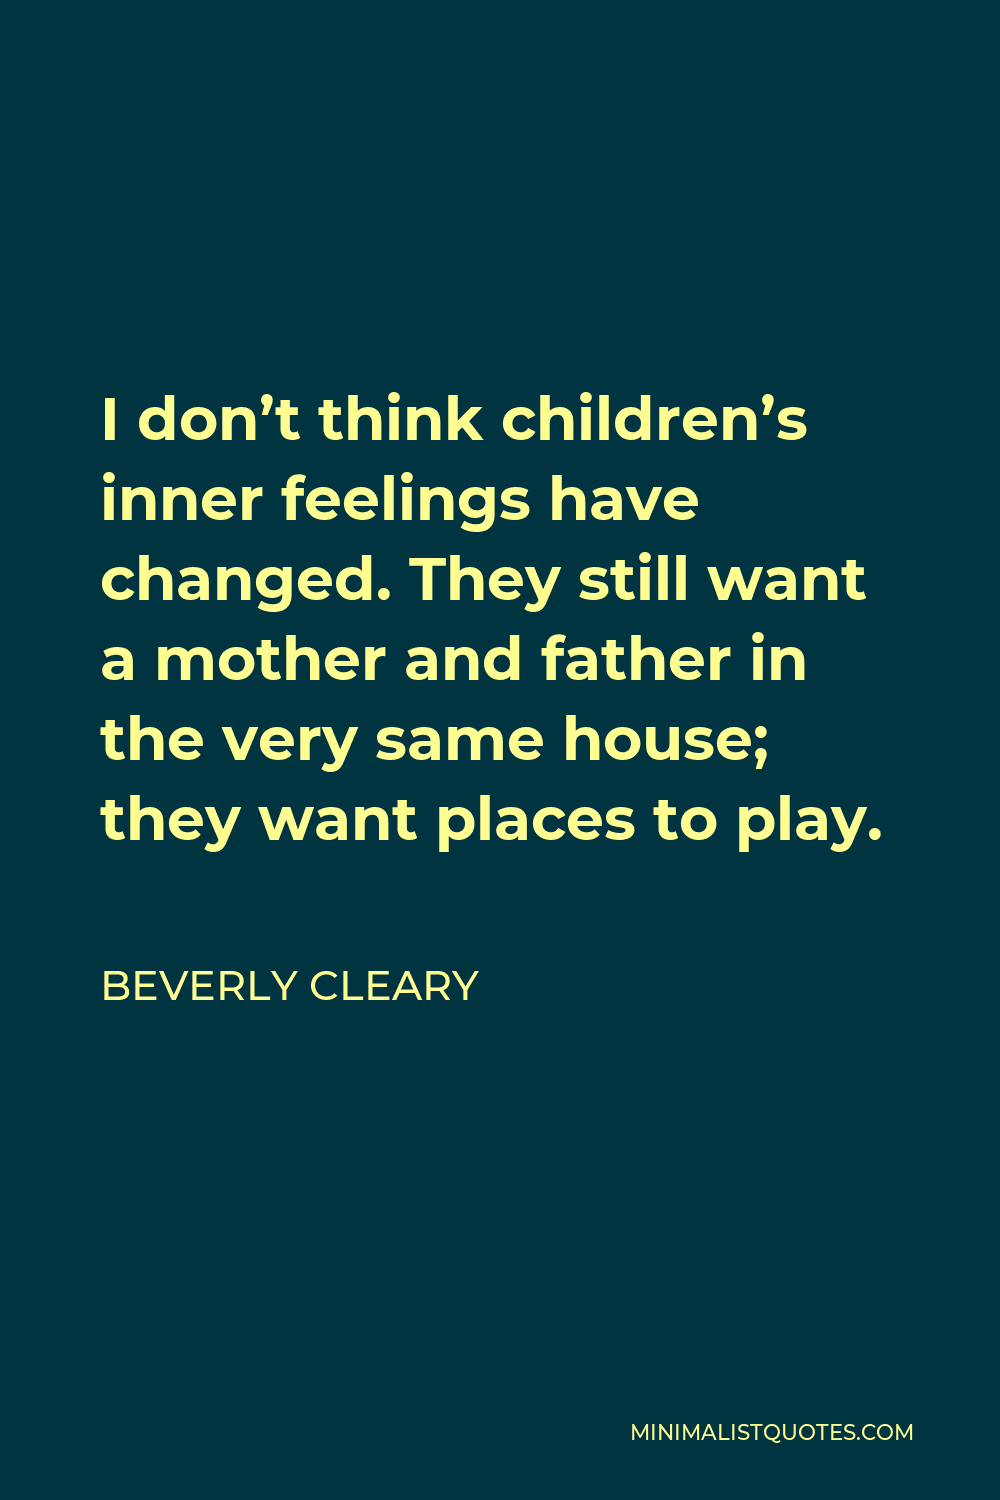 Beverly Cleary Quote - I don’t think children’s inner feelings have changed. They still want a mother and father in the very same house; they want places to play.